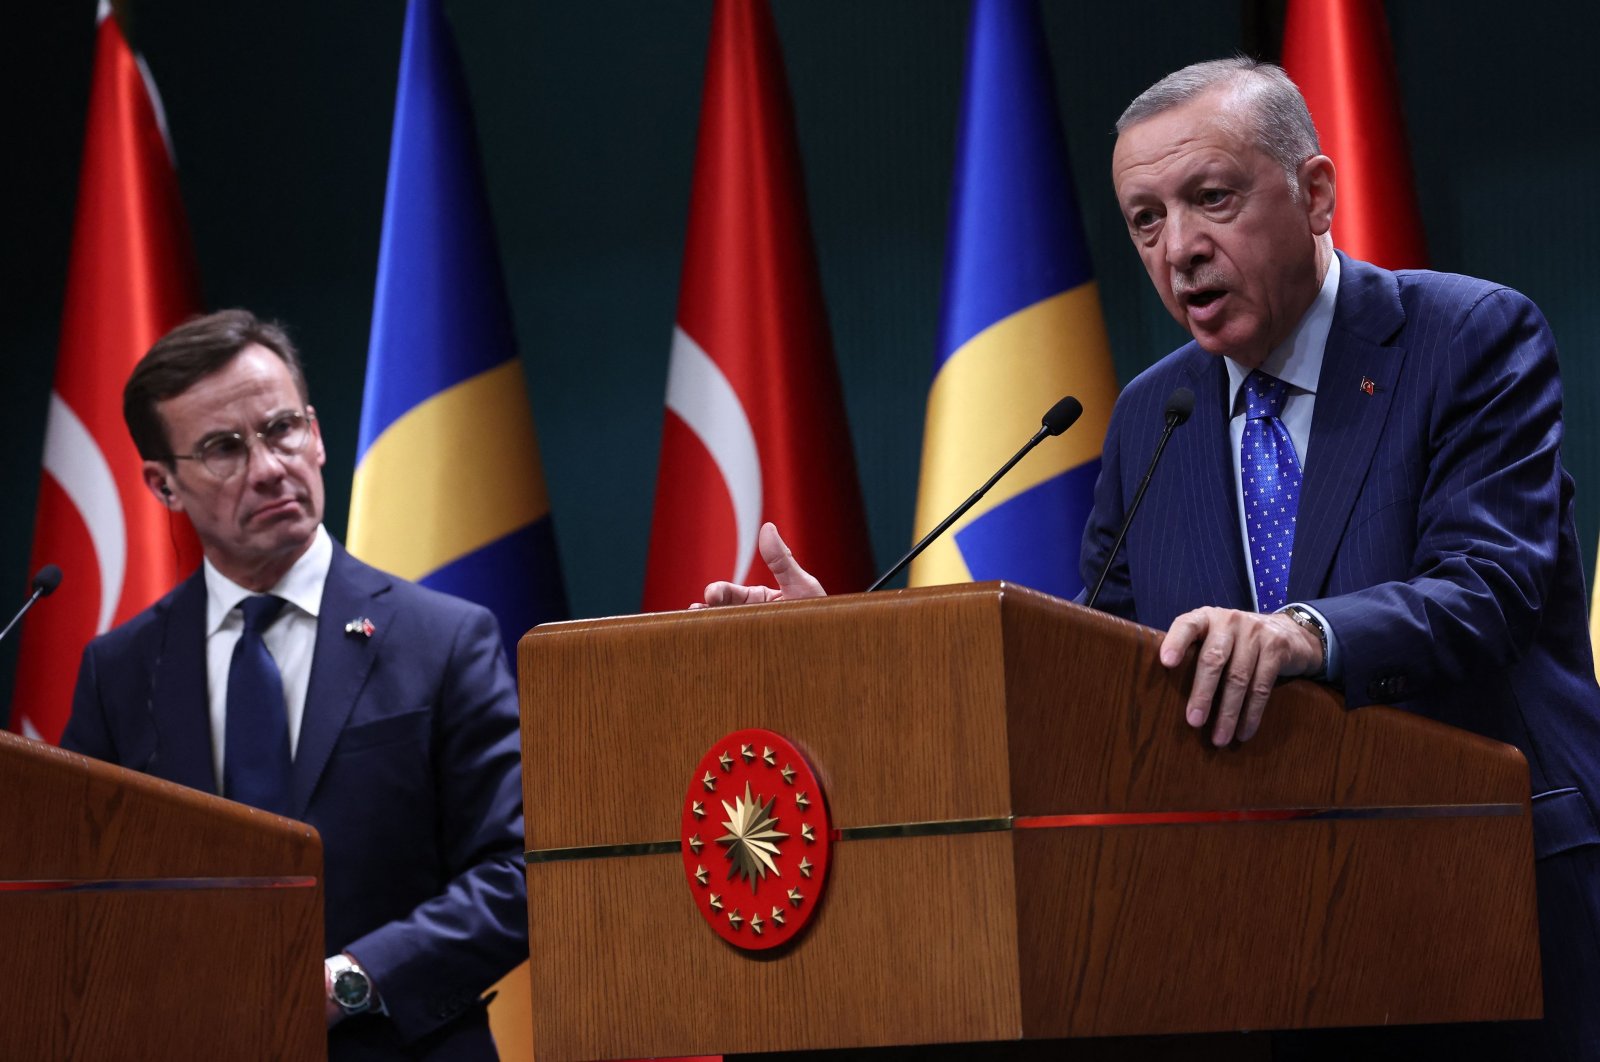 President Recep Tayyip Erdoğan and Swedish Prime Minister Ulf Kristersson (L) hold a press conference following their meeting at the Presidential Palace in the capital Ankara, Türkiye, Nov. 8, 2022. (AFP Photo)